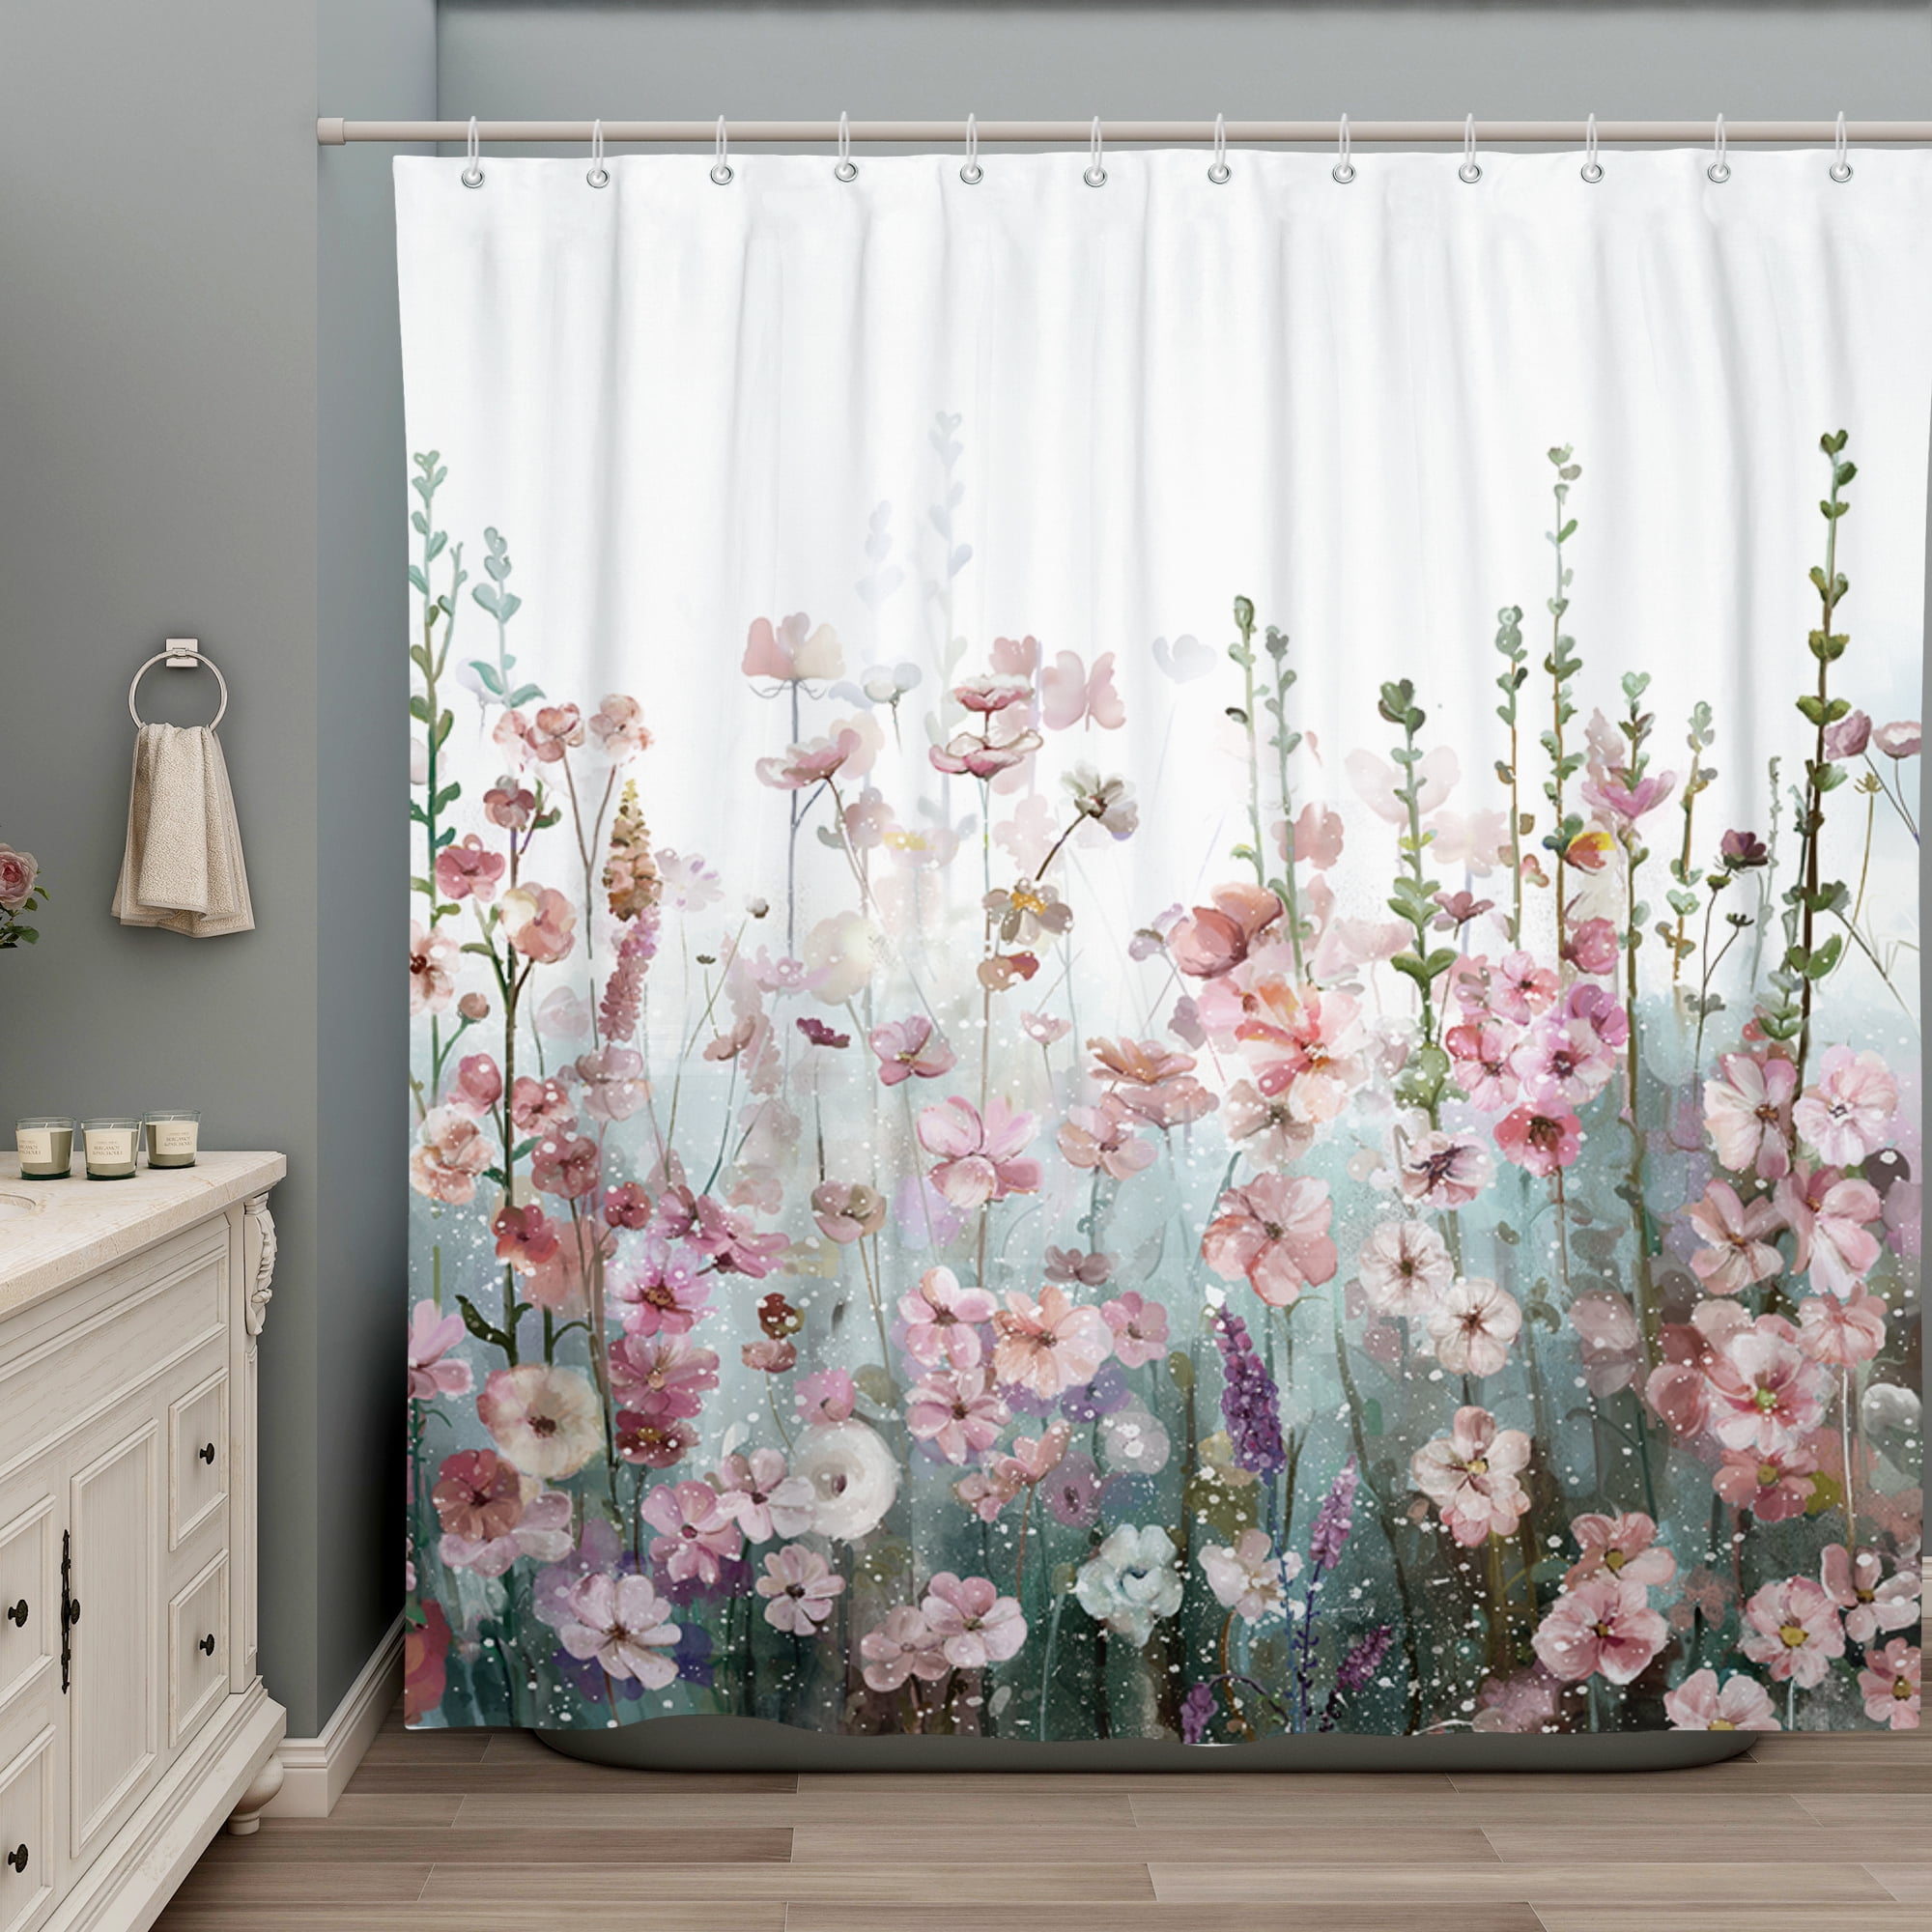 JOOCAR Peonies Bouquet Fabric Shower Curtain with Hooks Elegance Floral  Bloom Beautiful Fresh Flower Bath Shower Curtain Polyester 72x72 Inch for  Bathrooms Bathtubs Camping 